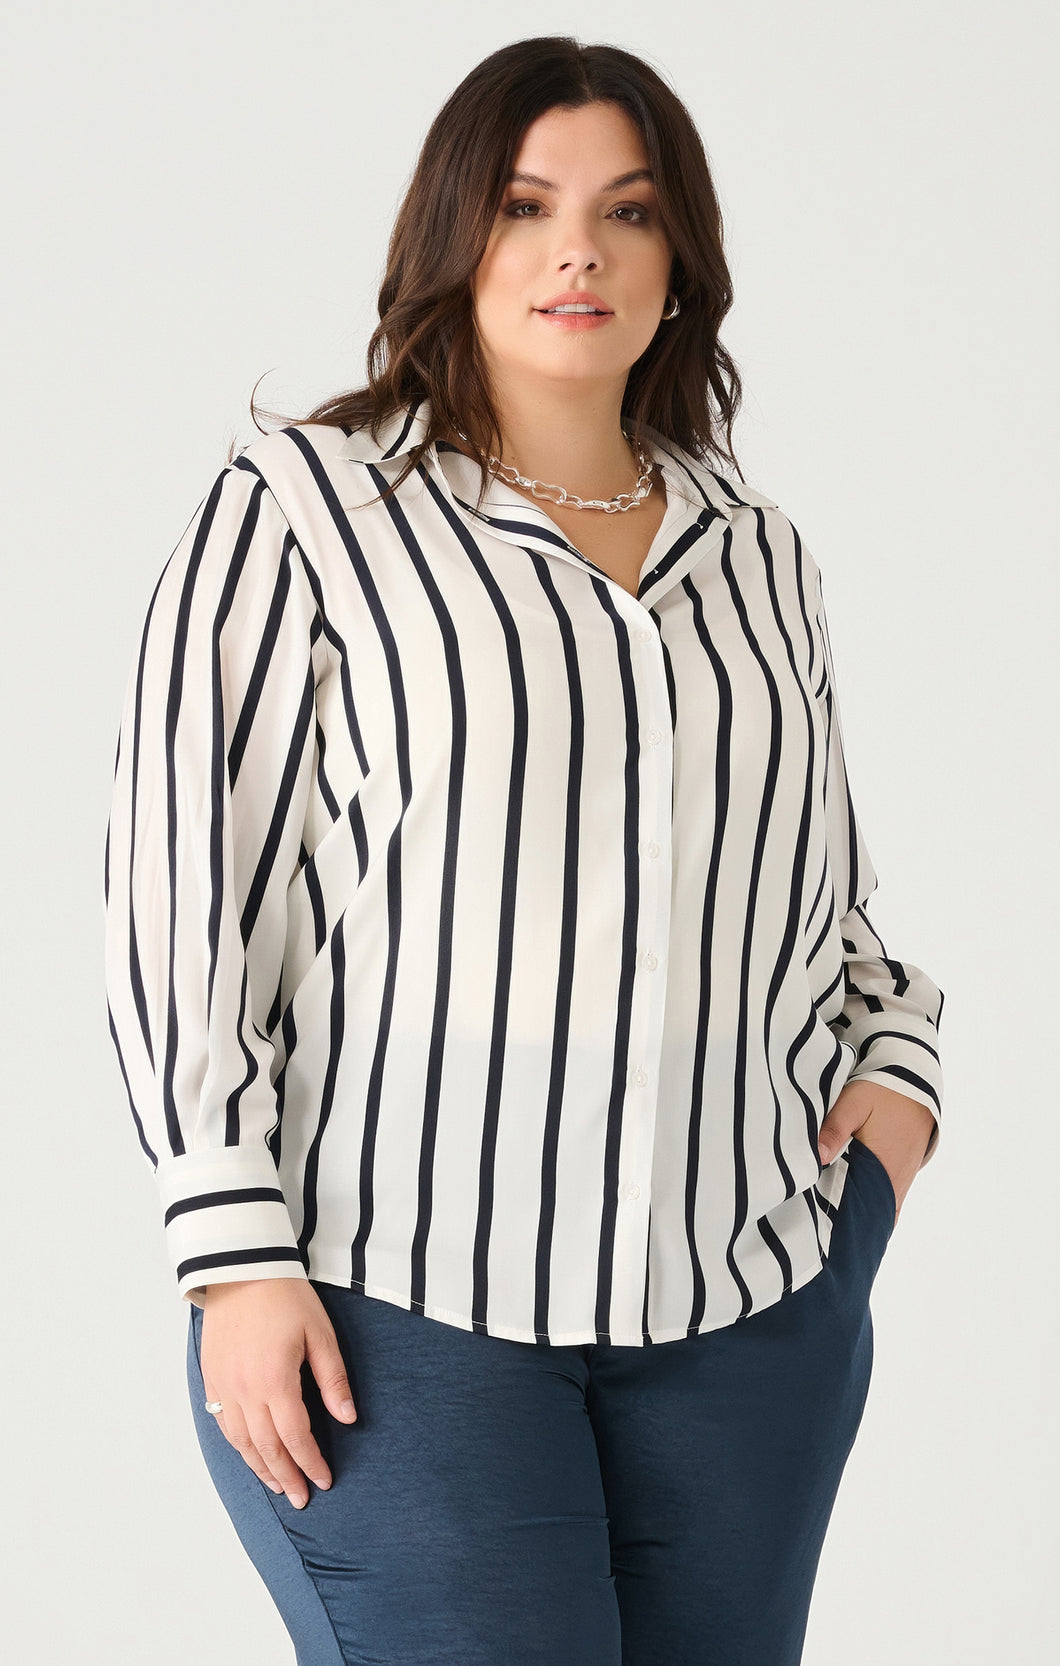 TEXTURED STRIPED BLOUSE by Dex (available in plus sizes)